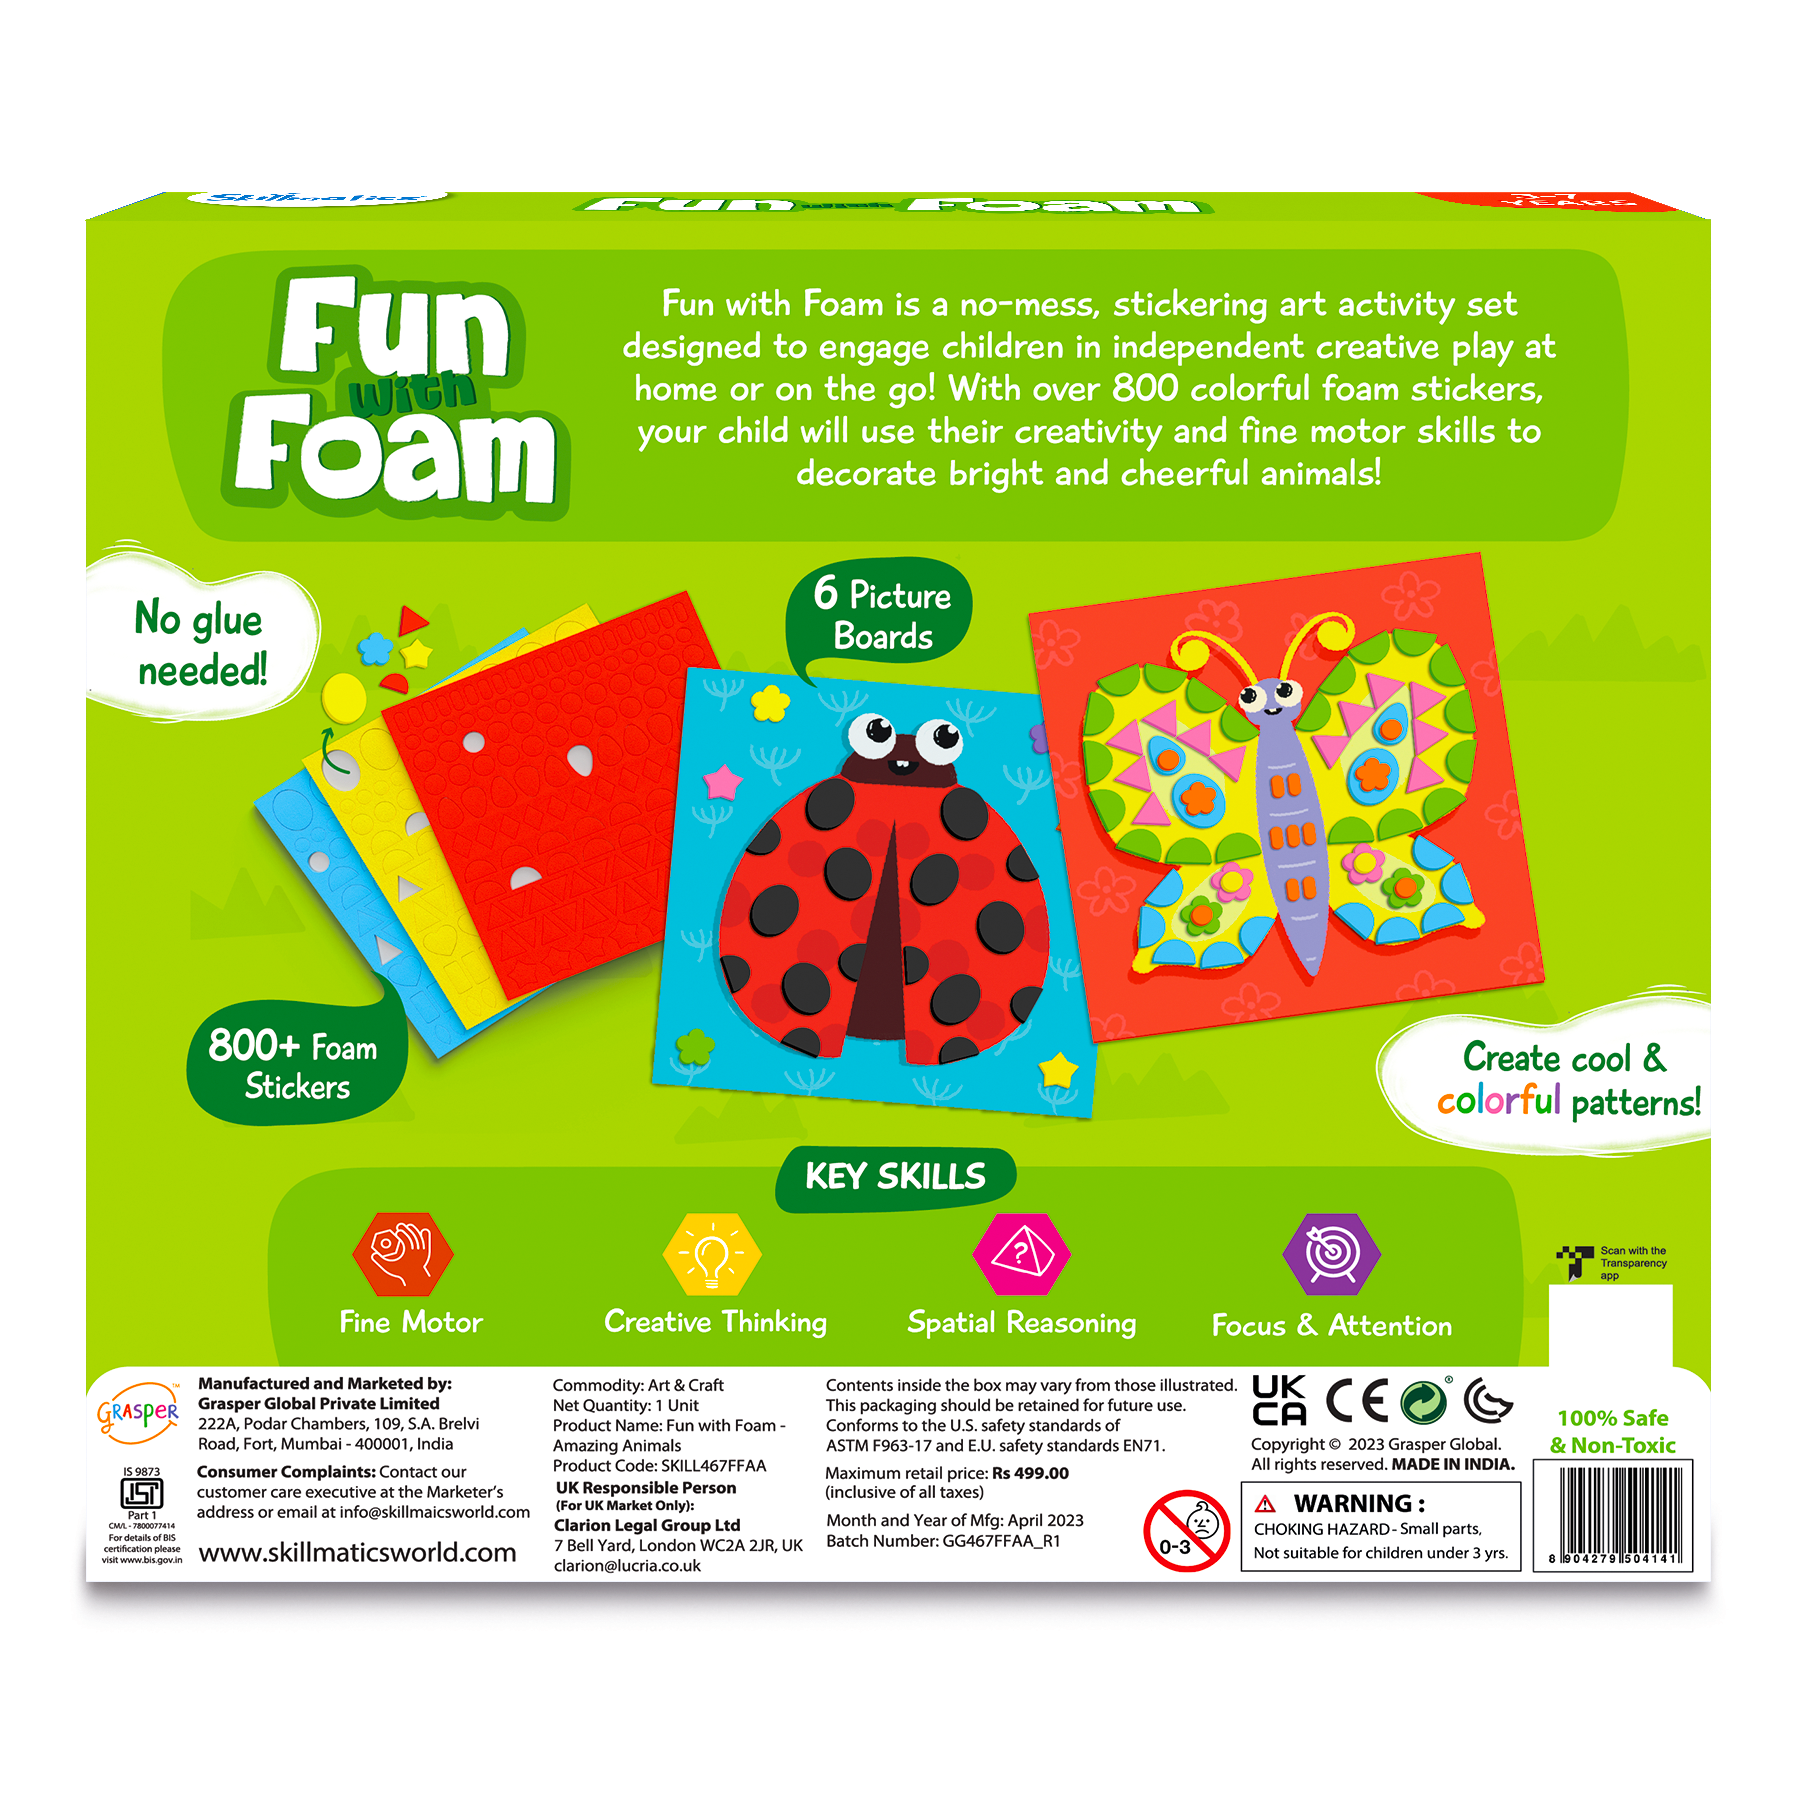 Skillmatics Art Activity - Fun With Foam, No Mess Sticker Art, 6 Creative Animal Themed Pictures, Gifts For Ages 3 To 7